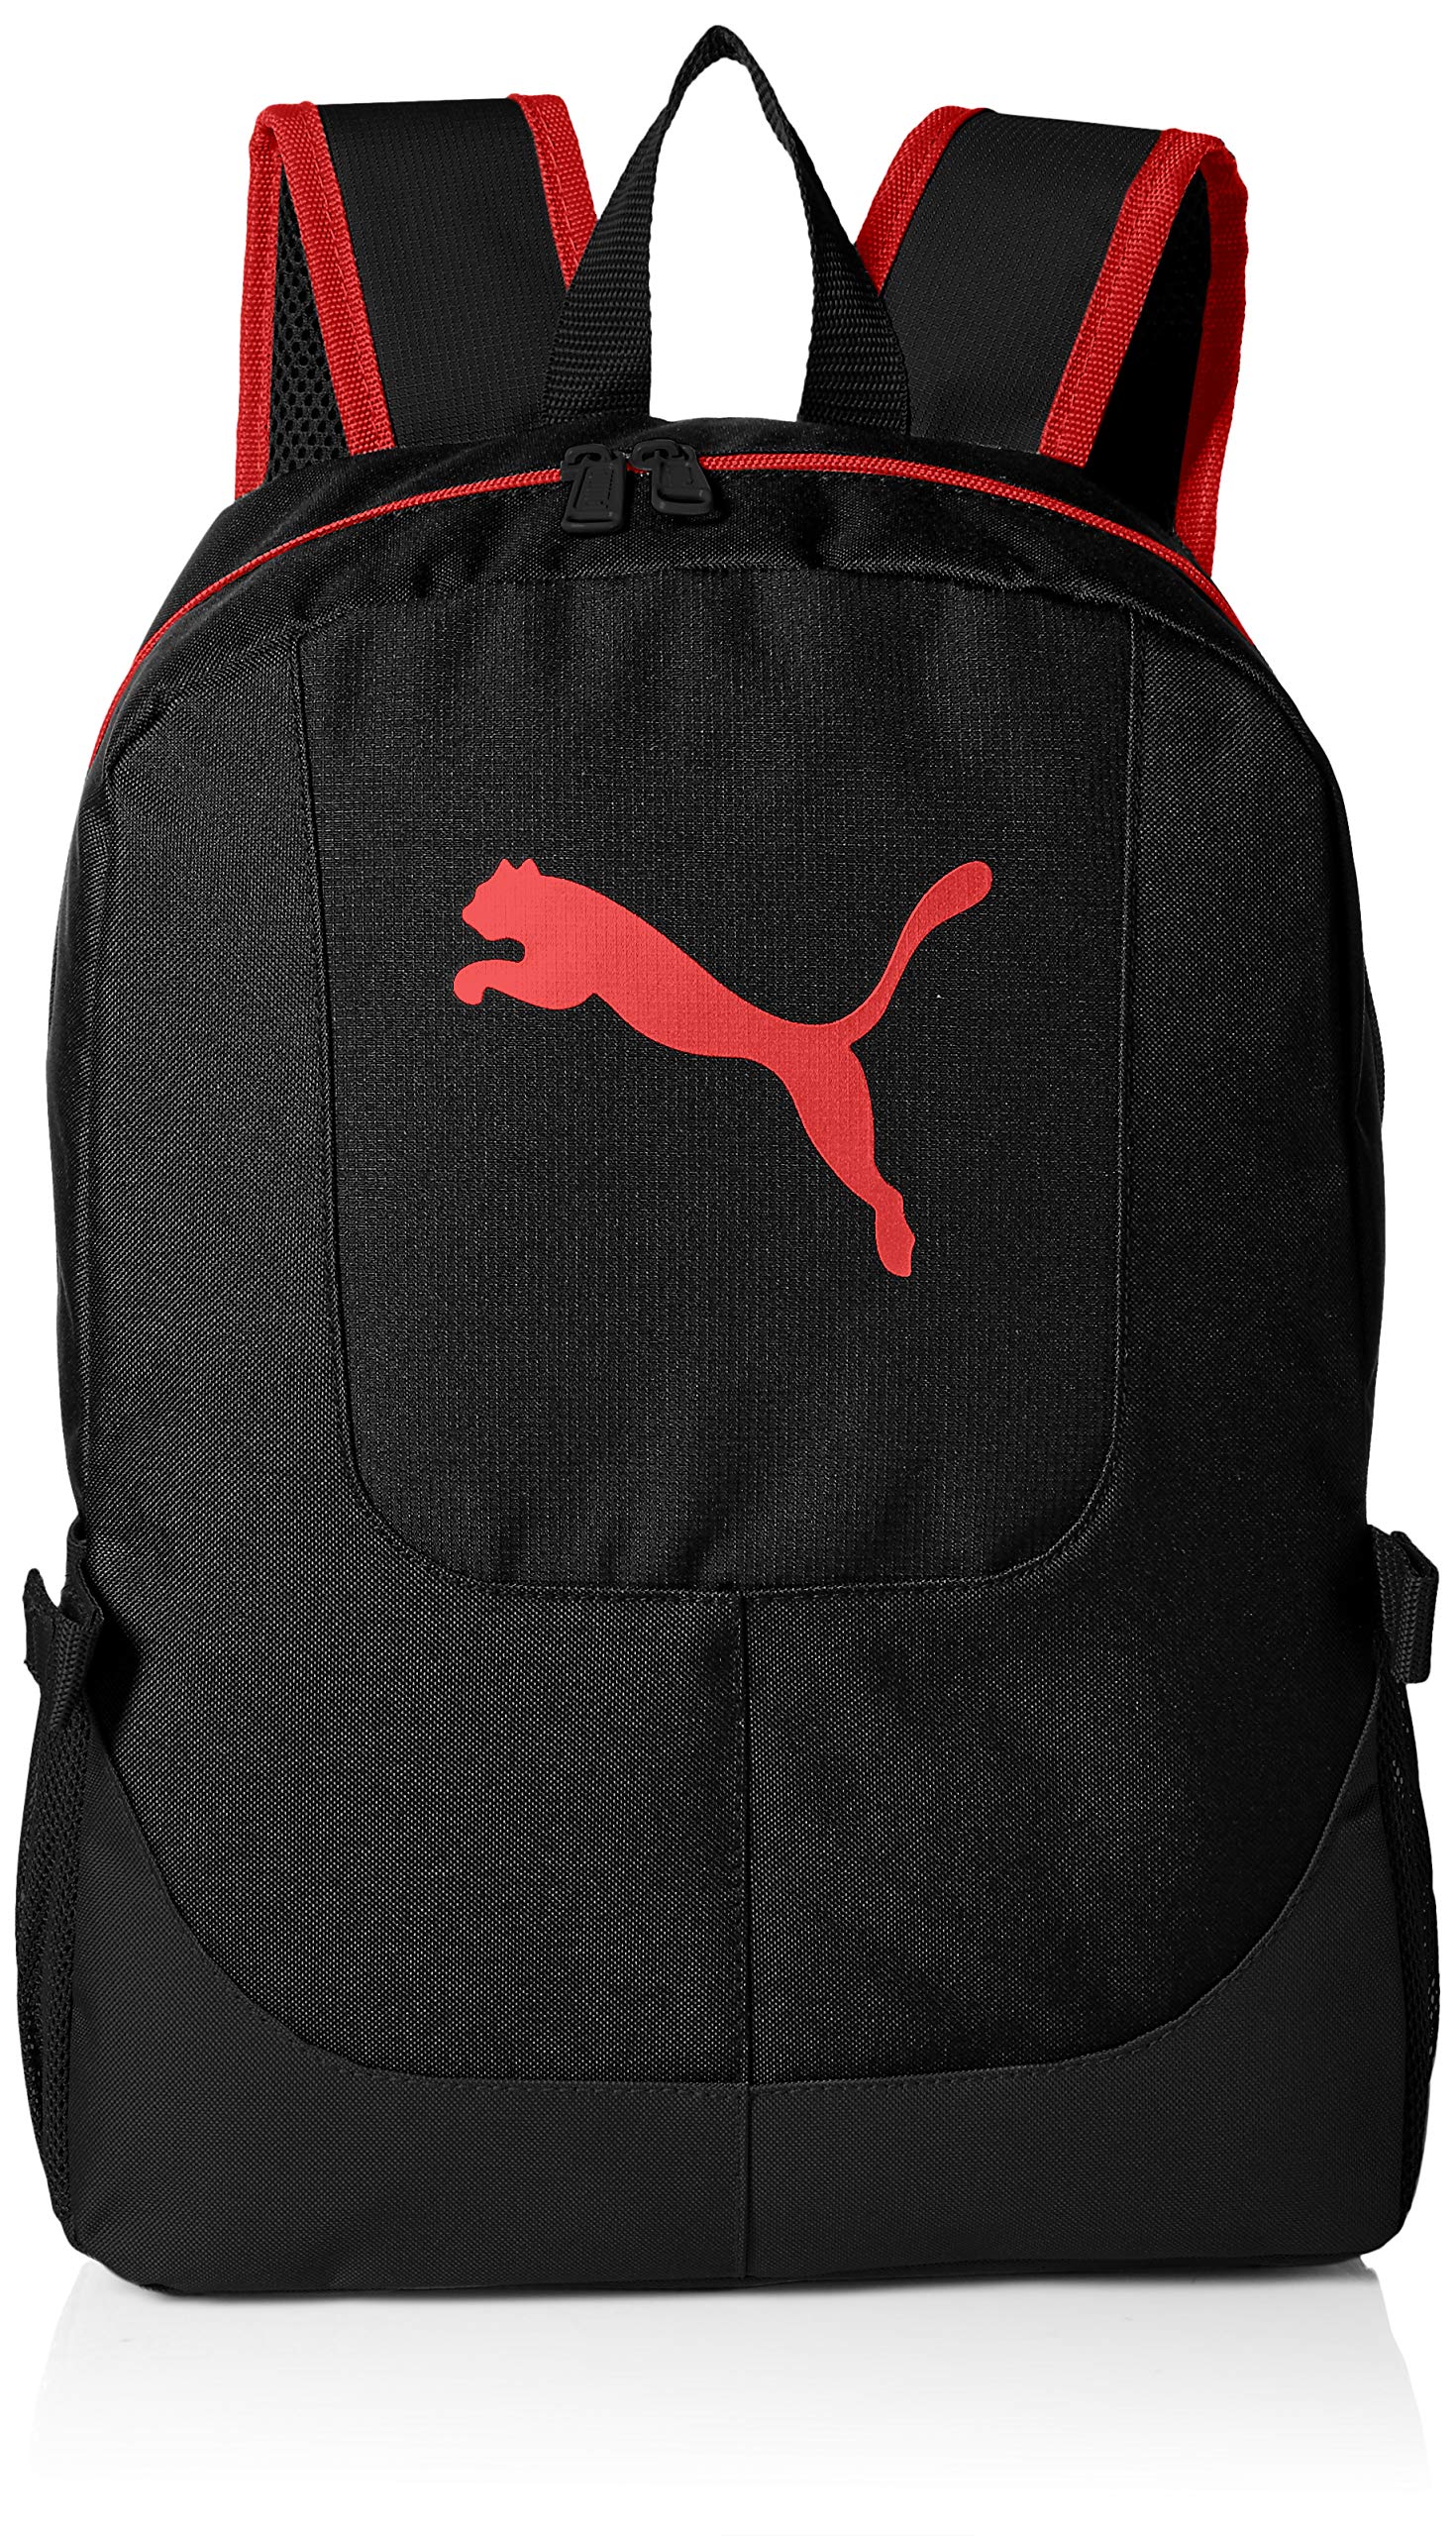 PUMA KIDS' EVERCAT BACKPACK & LUNCH KIT COMBO, Black/Red, Youth Size